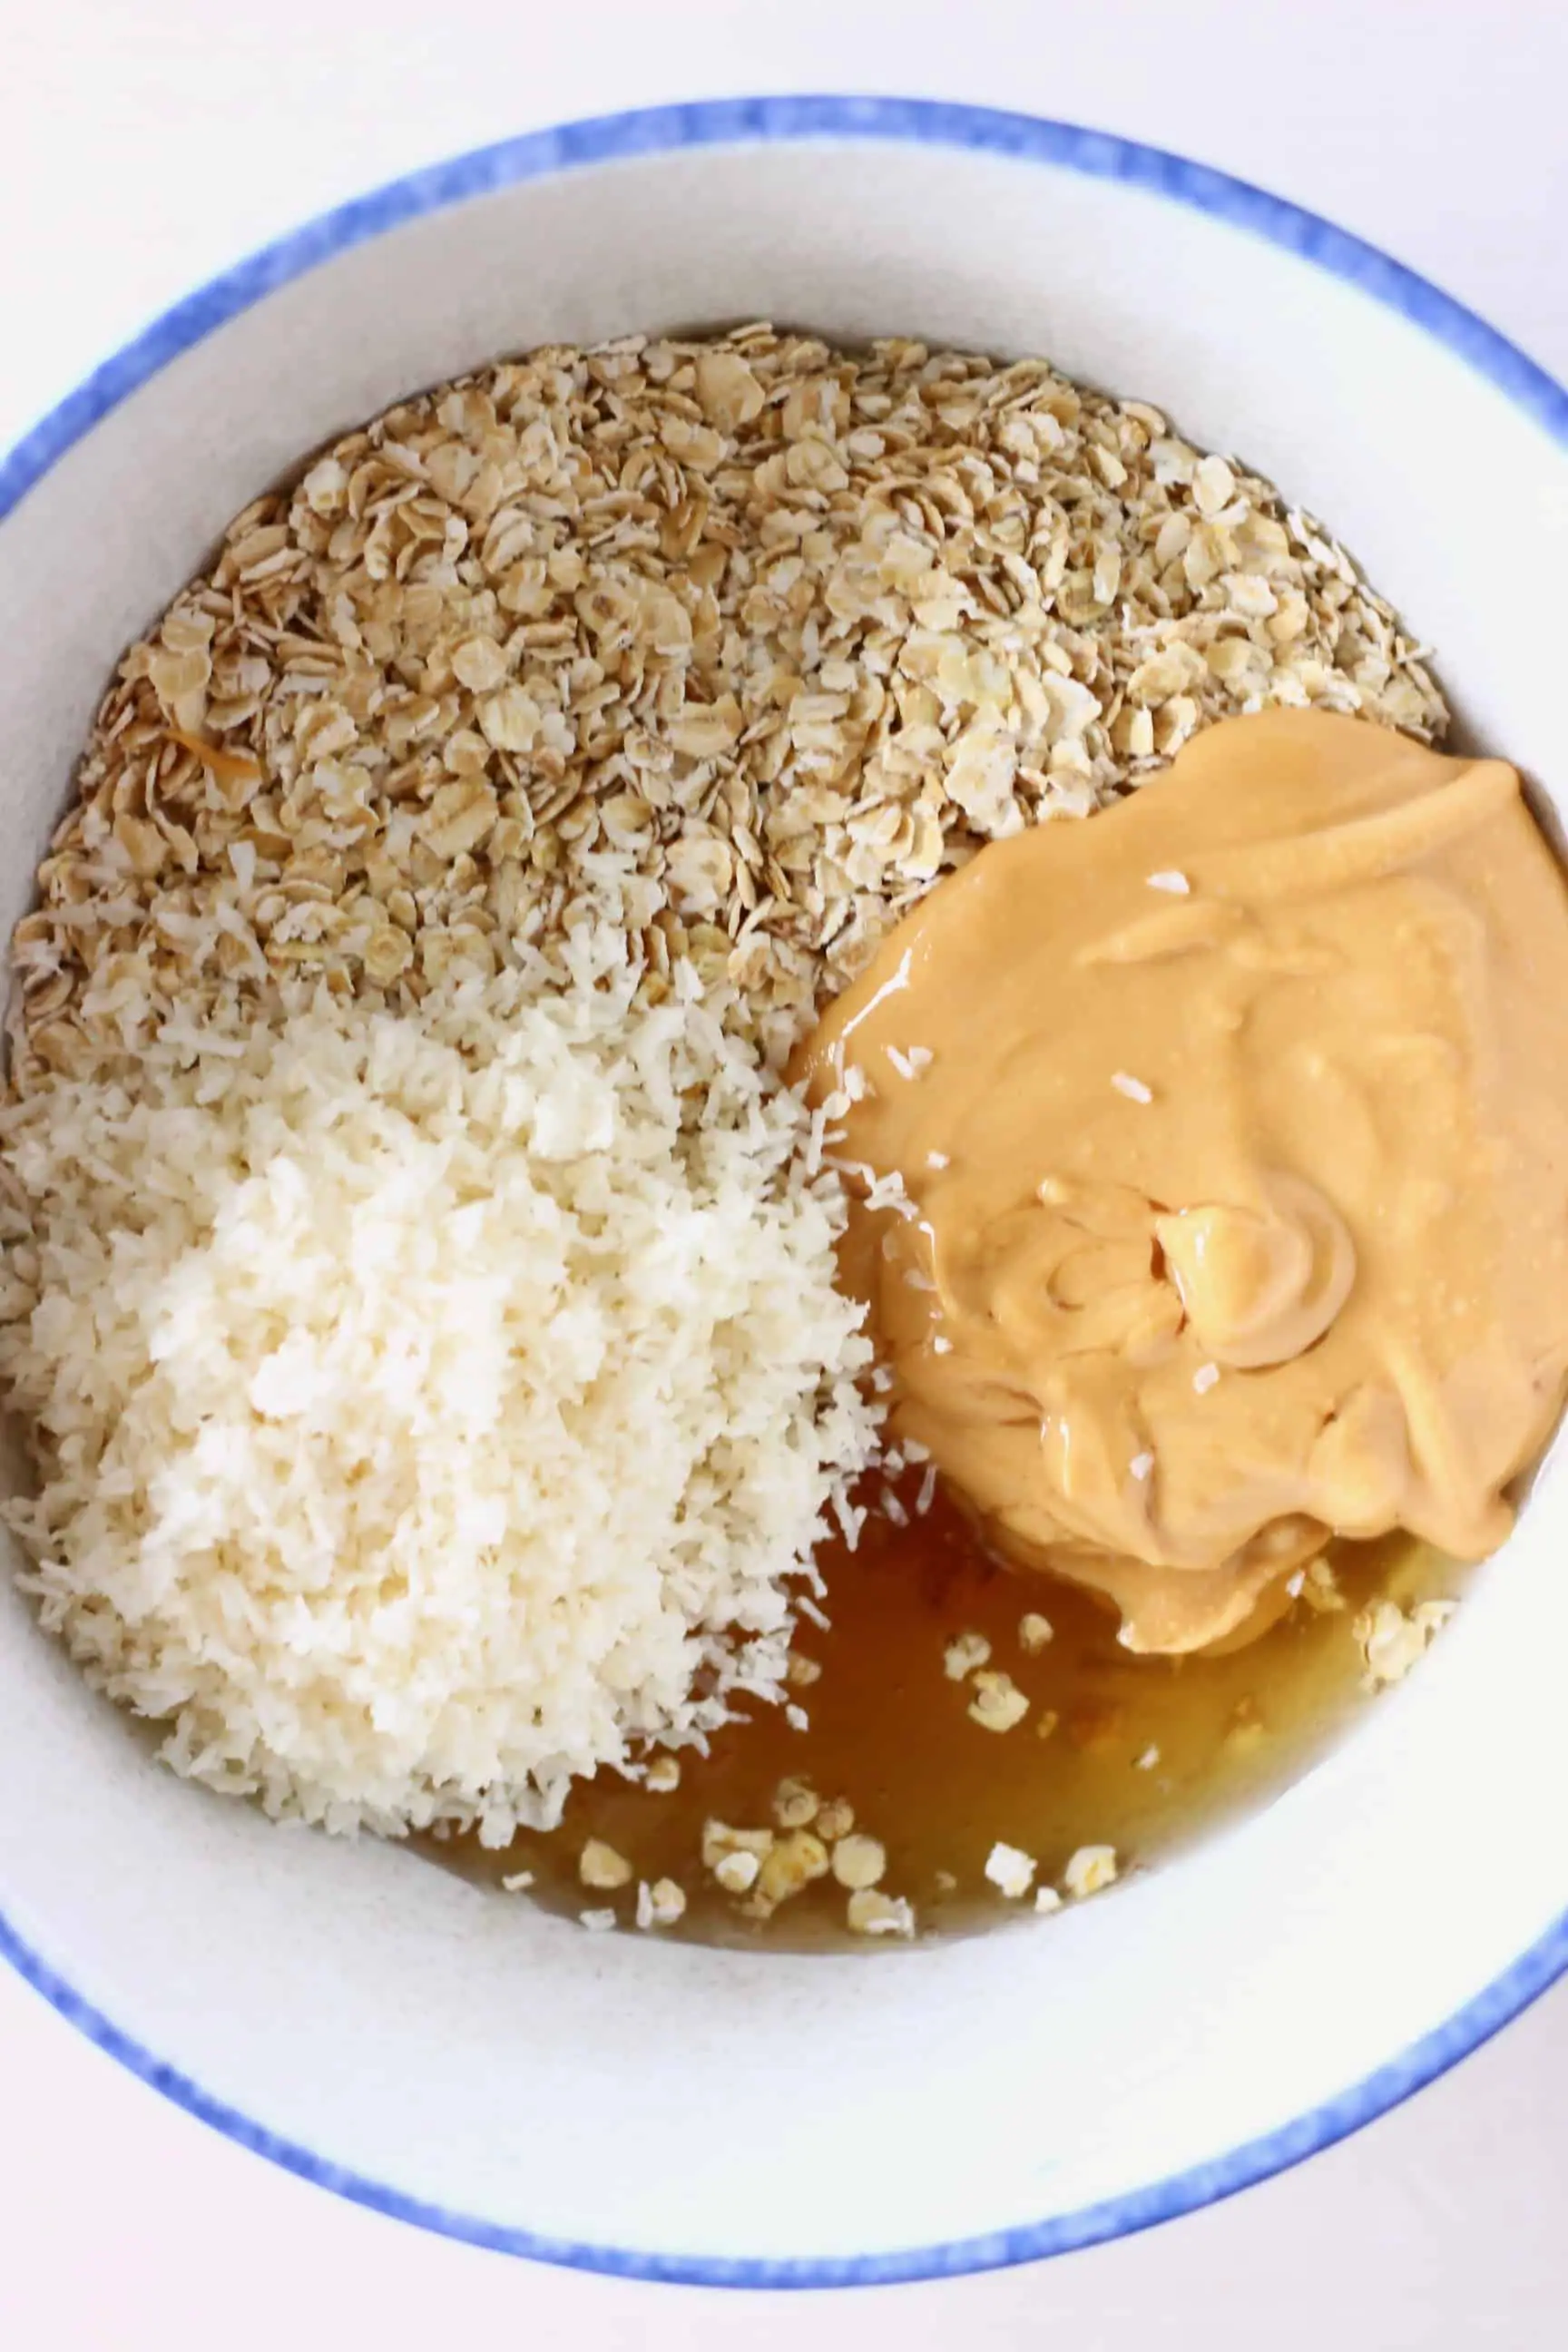 Oats, desiccated coconut, peanut butter and agave syrup in a bowl